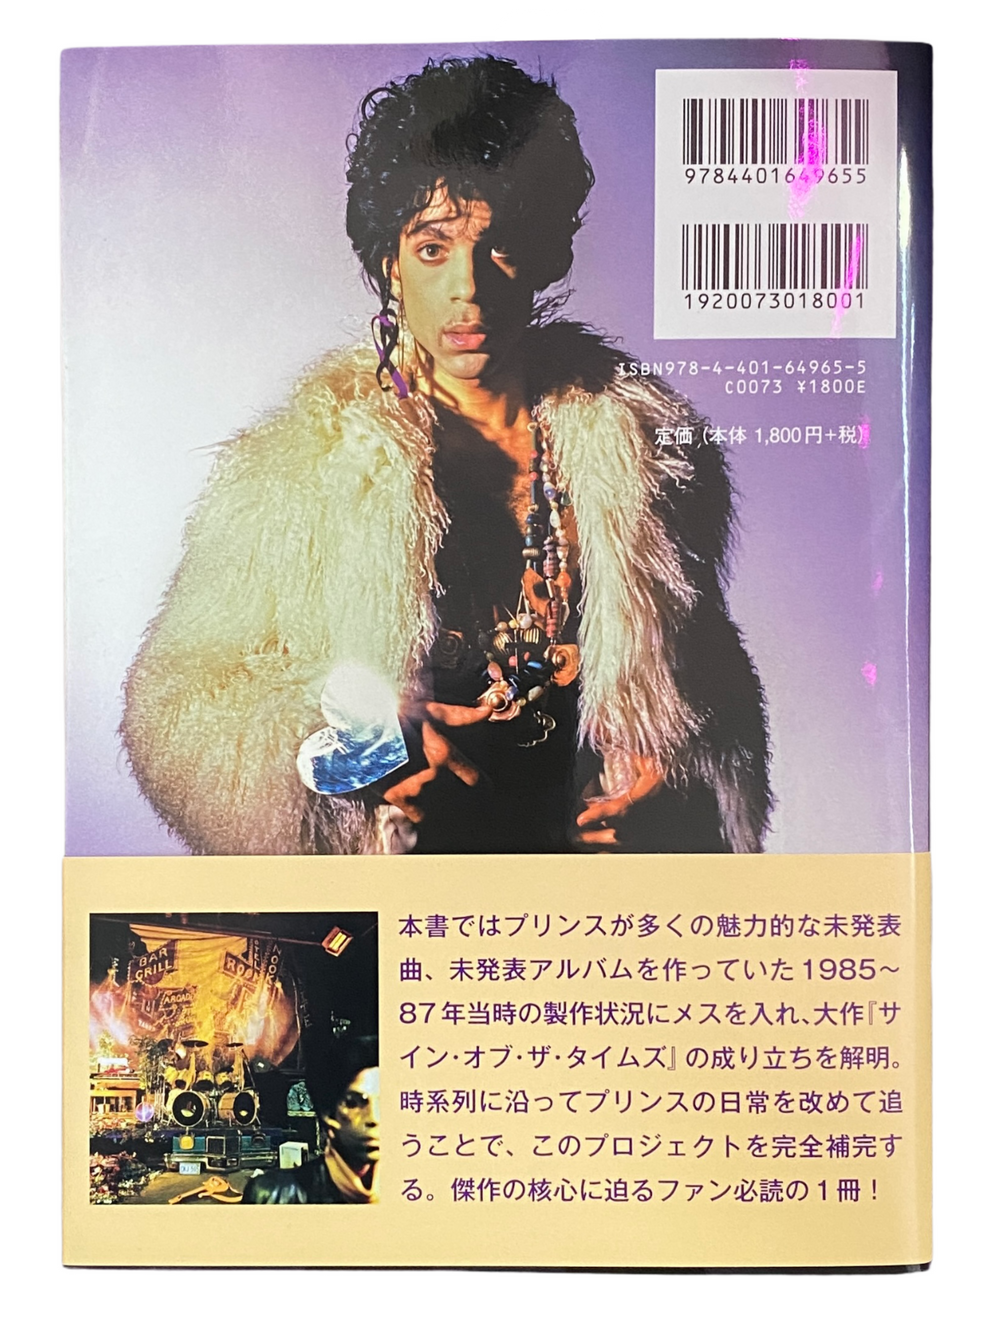 Crossbeat Presents Prince Sign O The Times By Tomo Hasegawa Japan Only Book